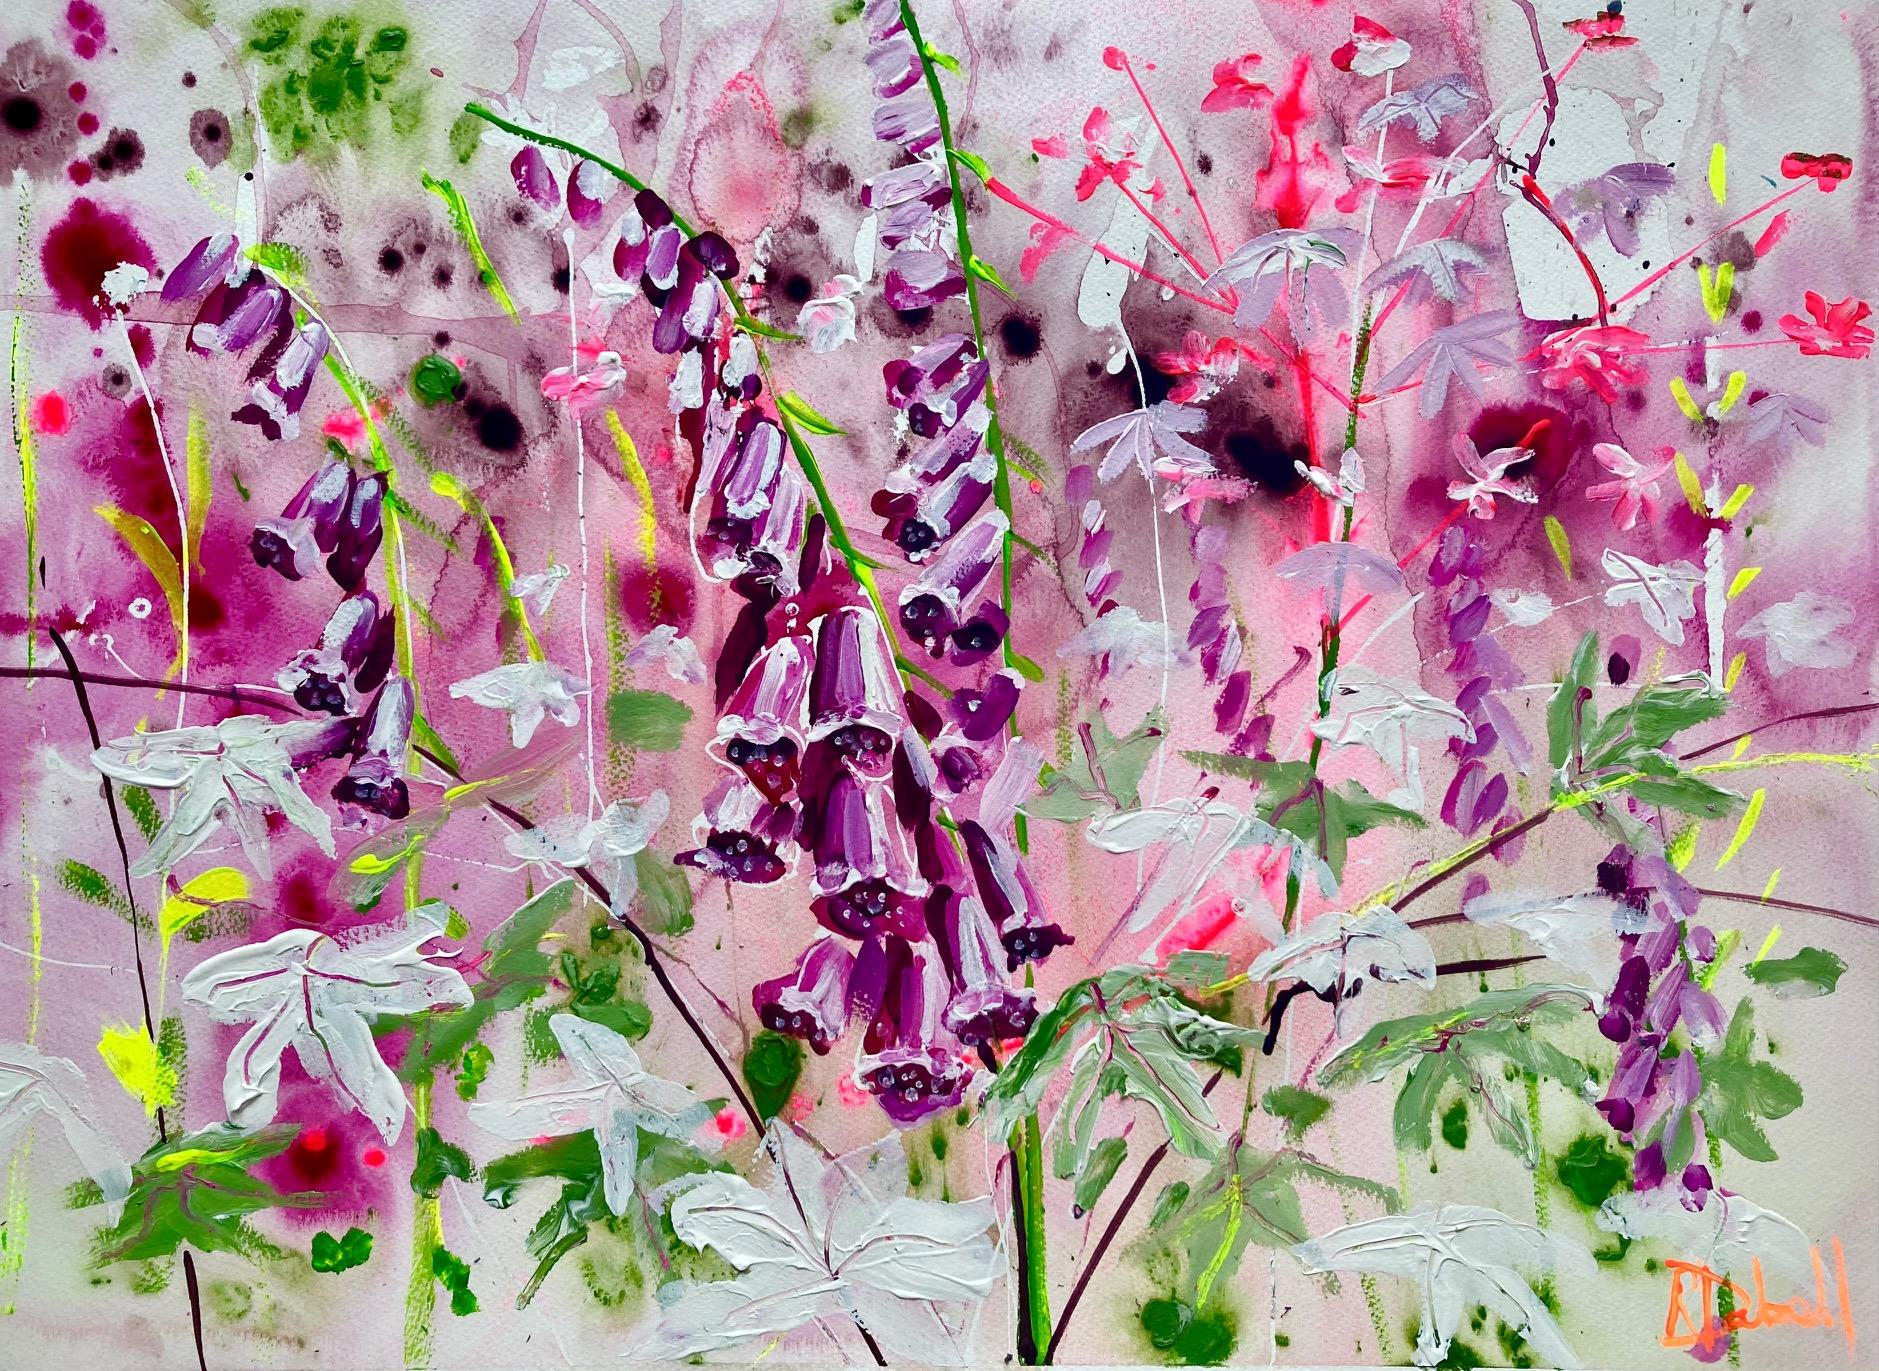 Foxglove bells for busy bees is an expressive, vibrant work on paper which captures one of the most well known wildflowers of the English countryside…

Rachael’s works on paper are particularly organic.  Diluted paint is allowed to migrate on a damp